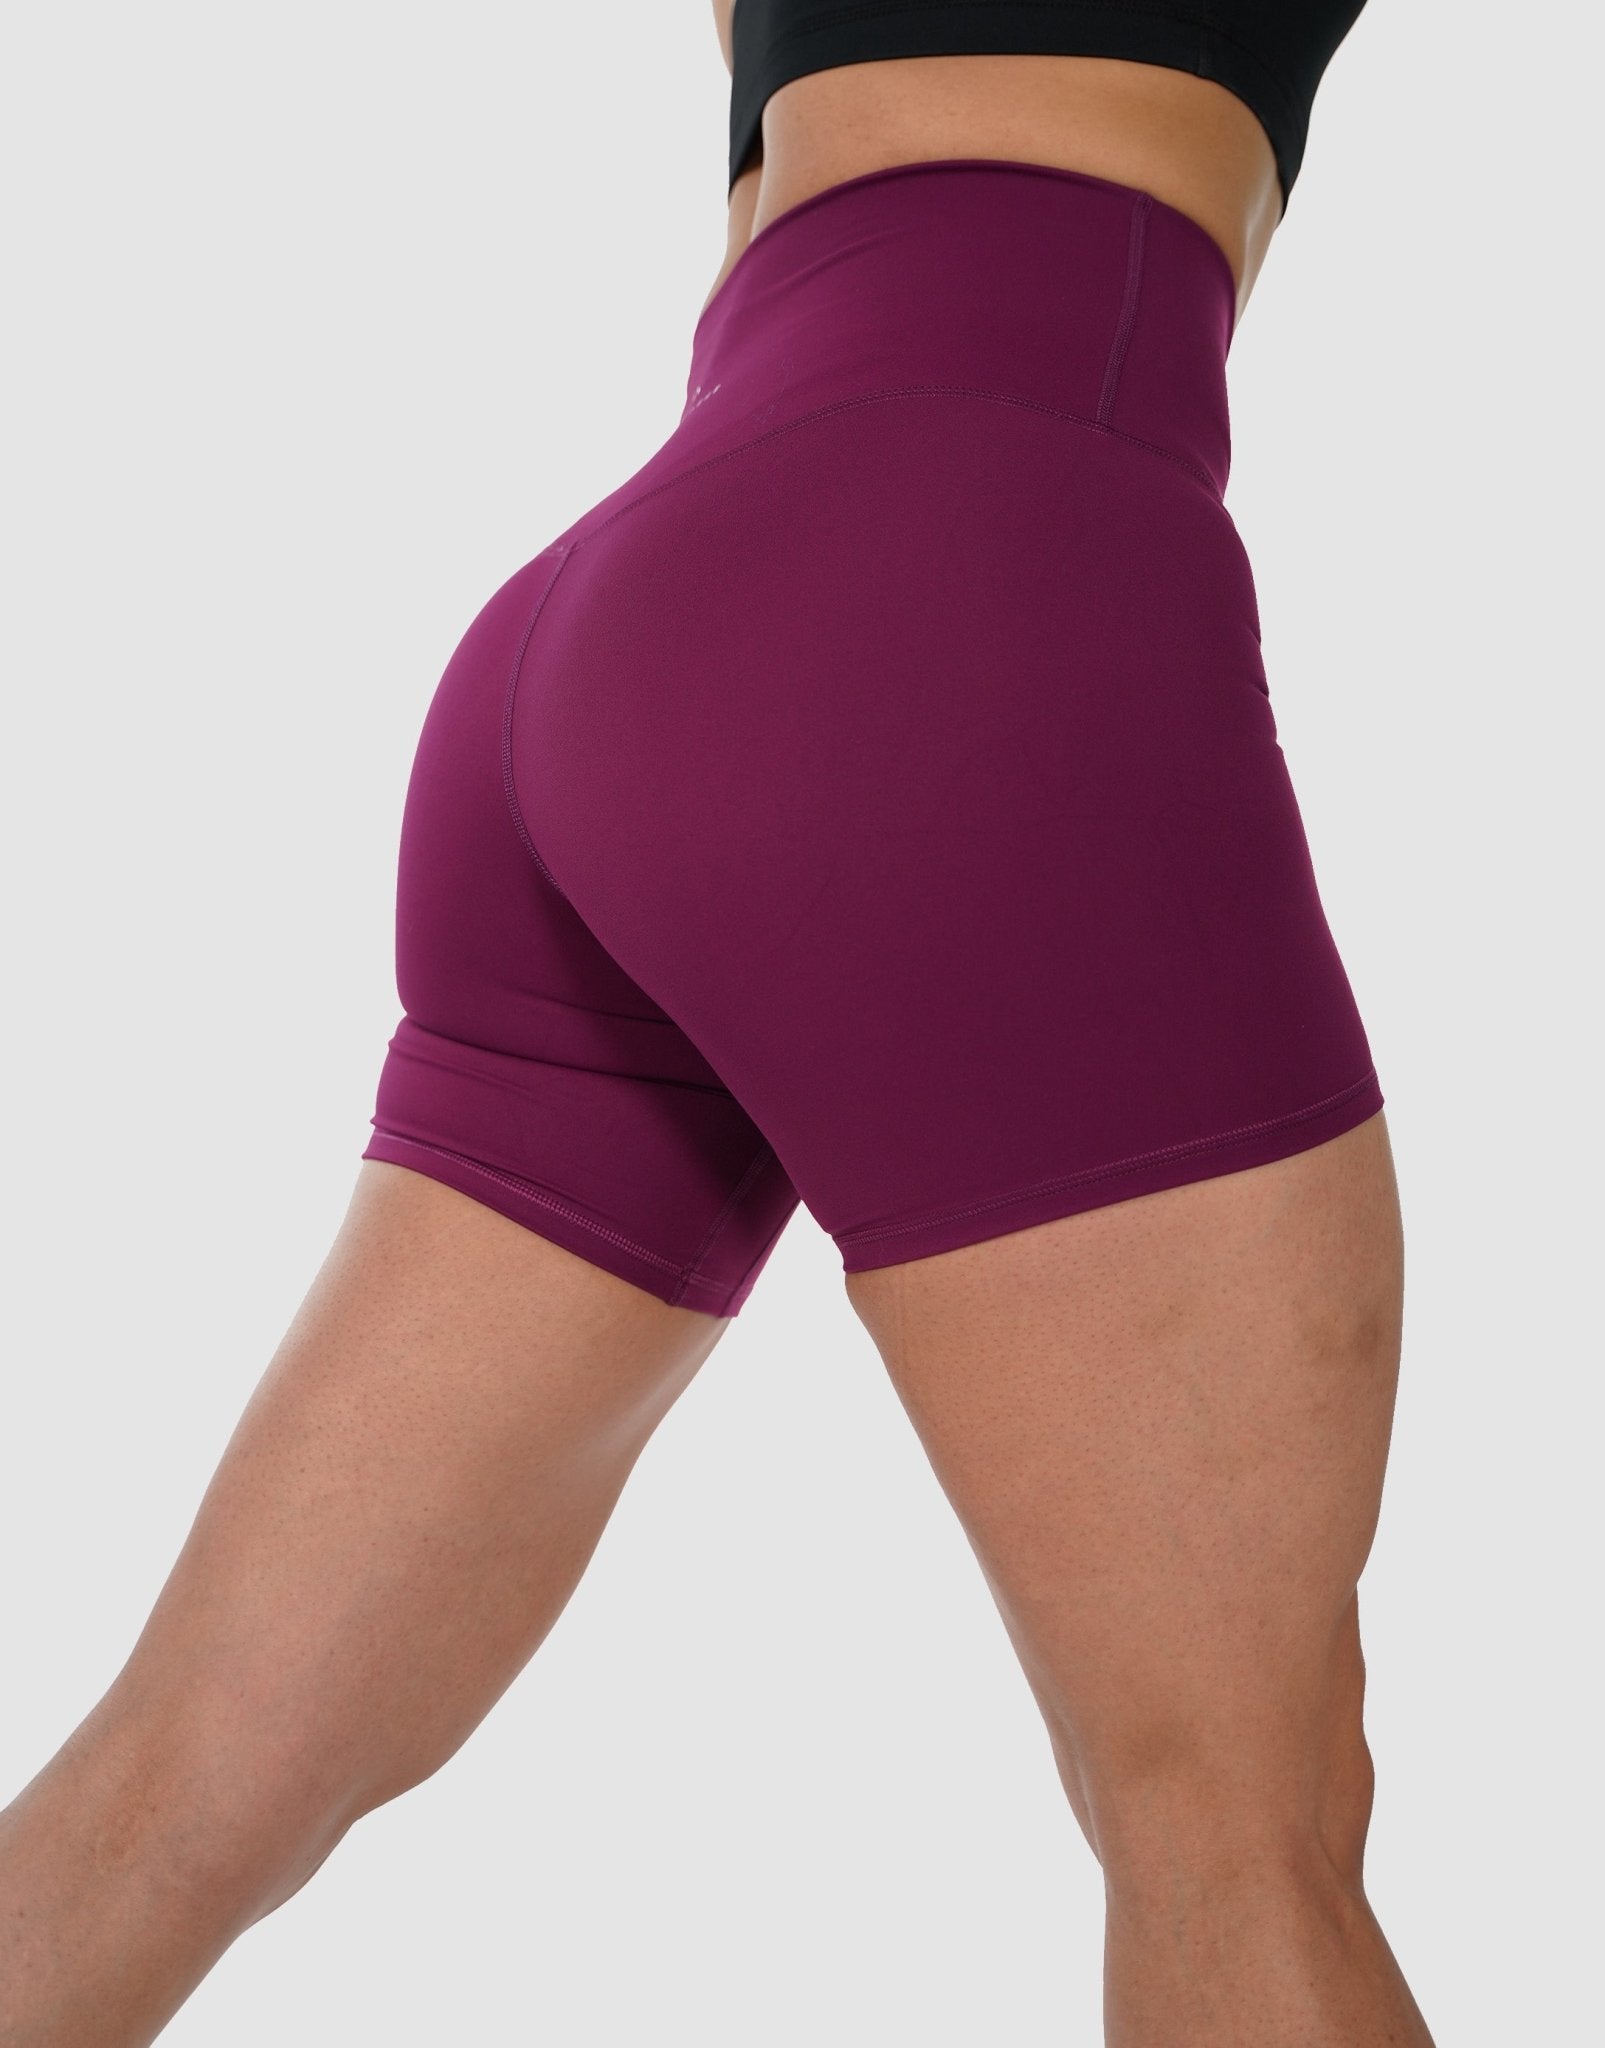 Cotton Plus Size Bike Shorts With Lace Trim Curvy Girl Thigh Protectors -   Canada